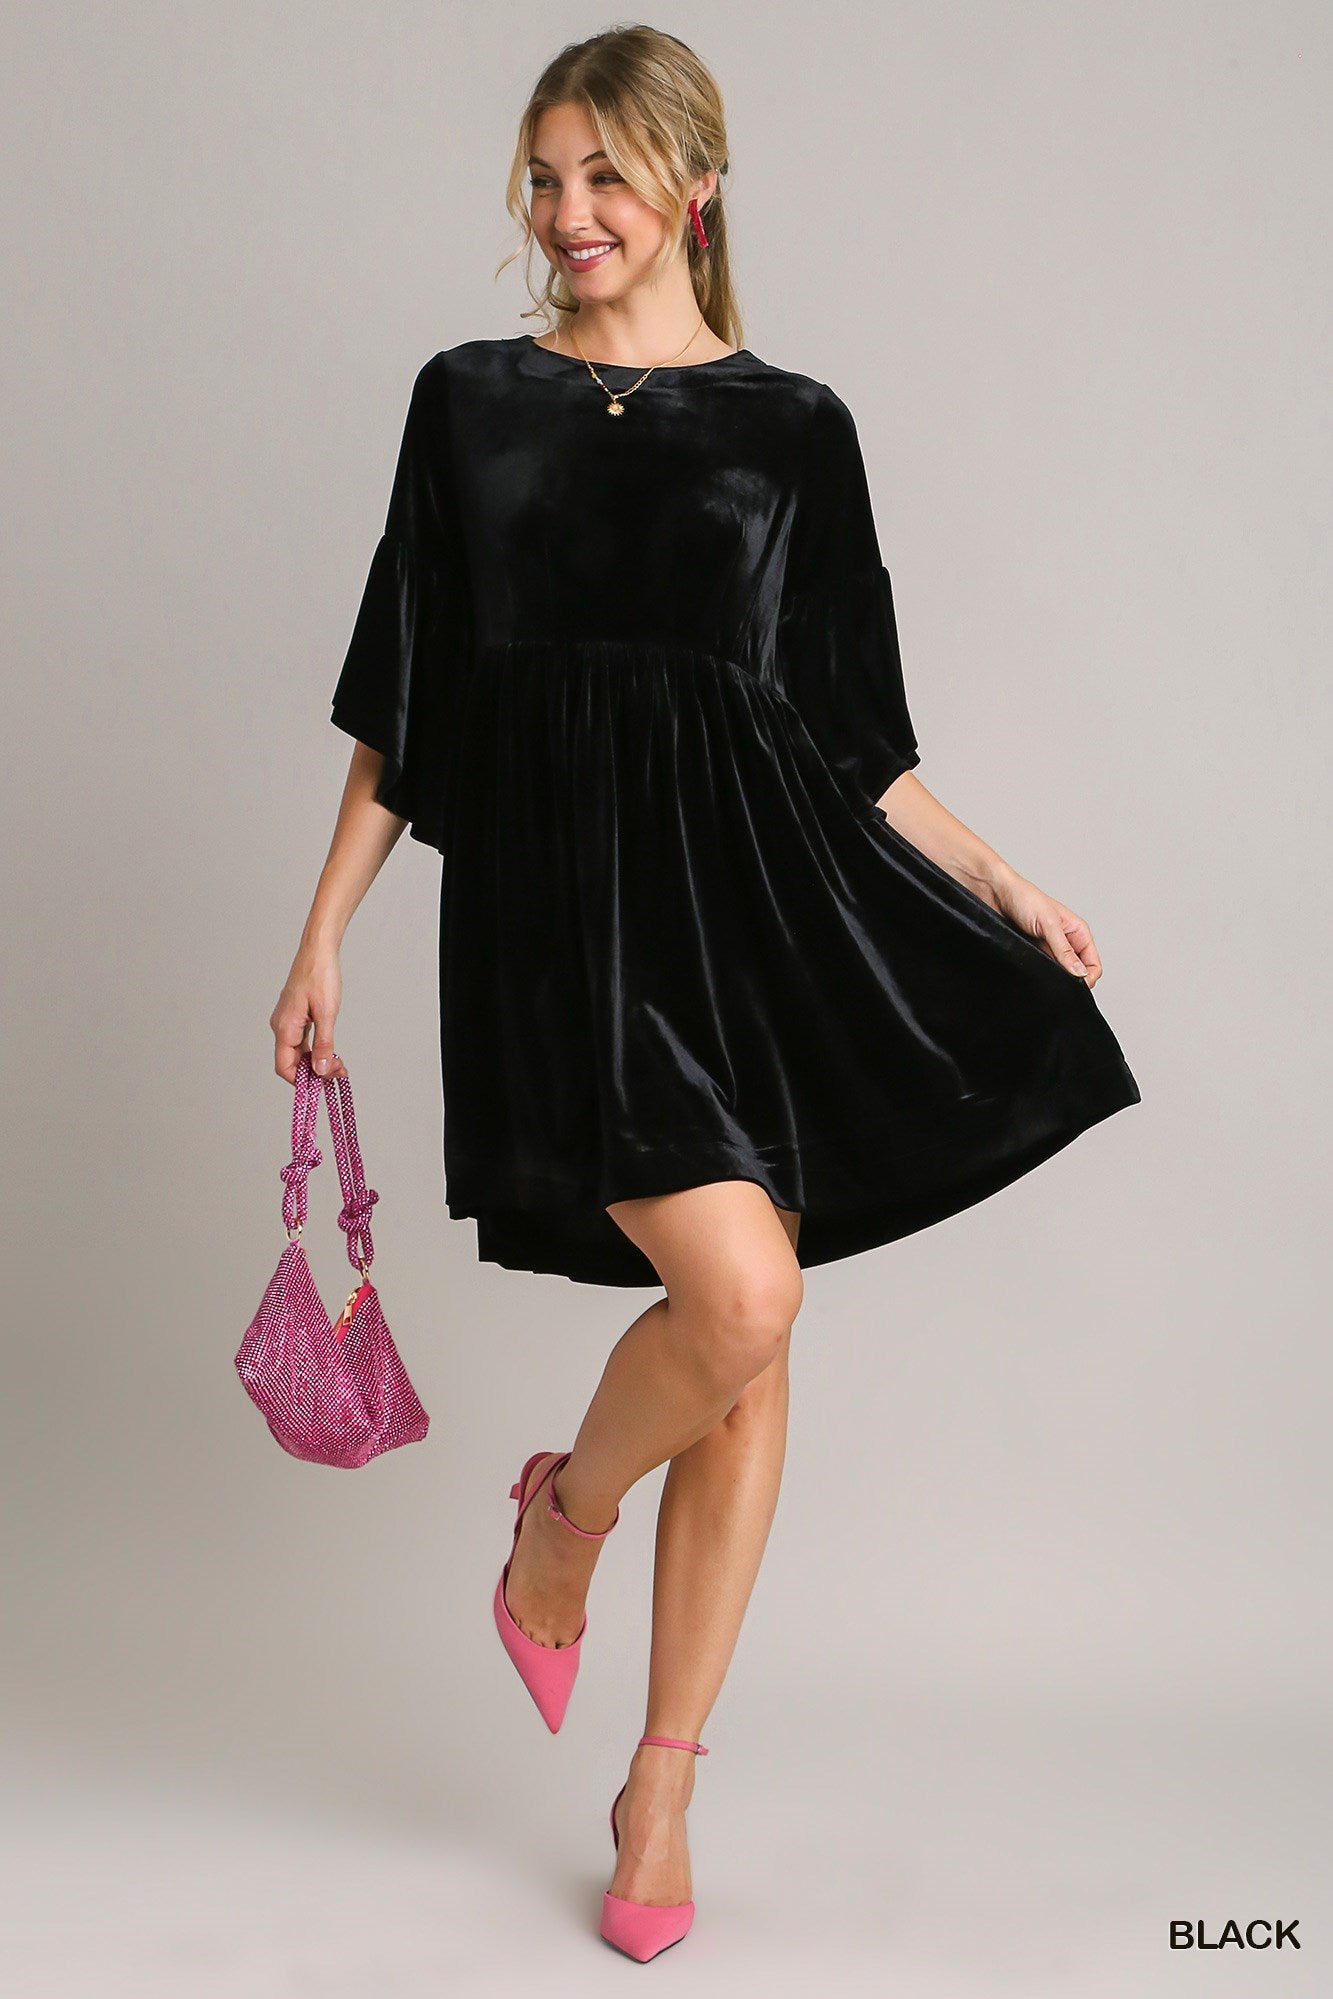 Ladies Night Out Dress